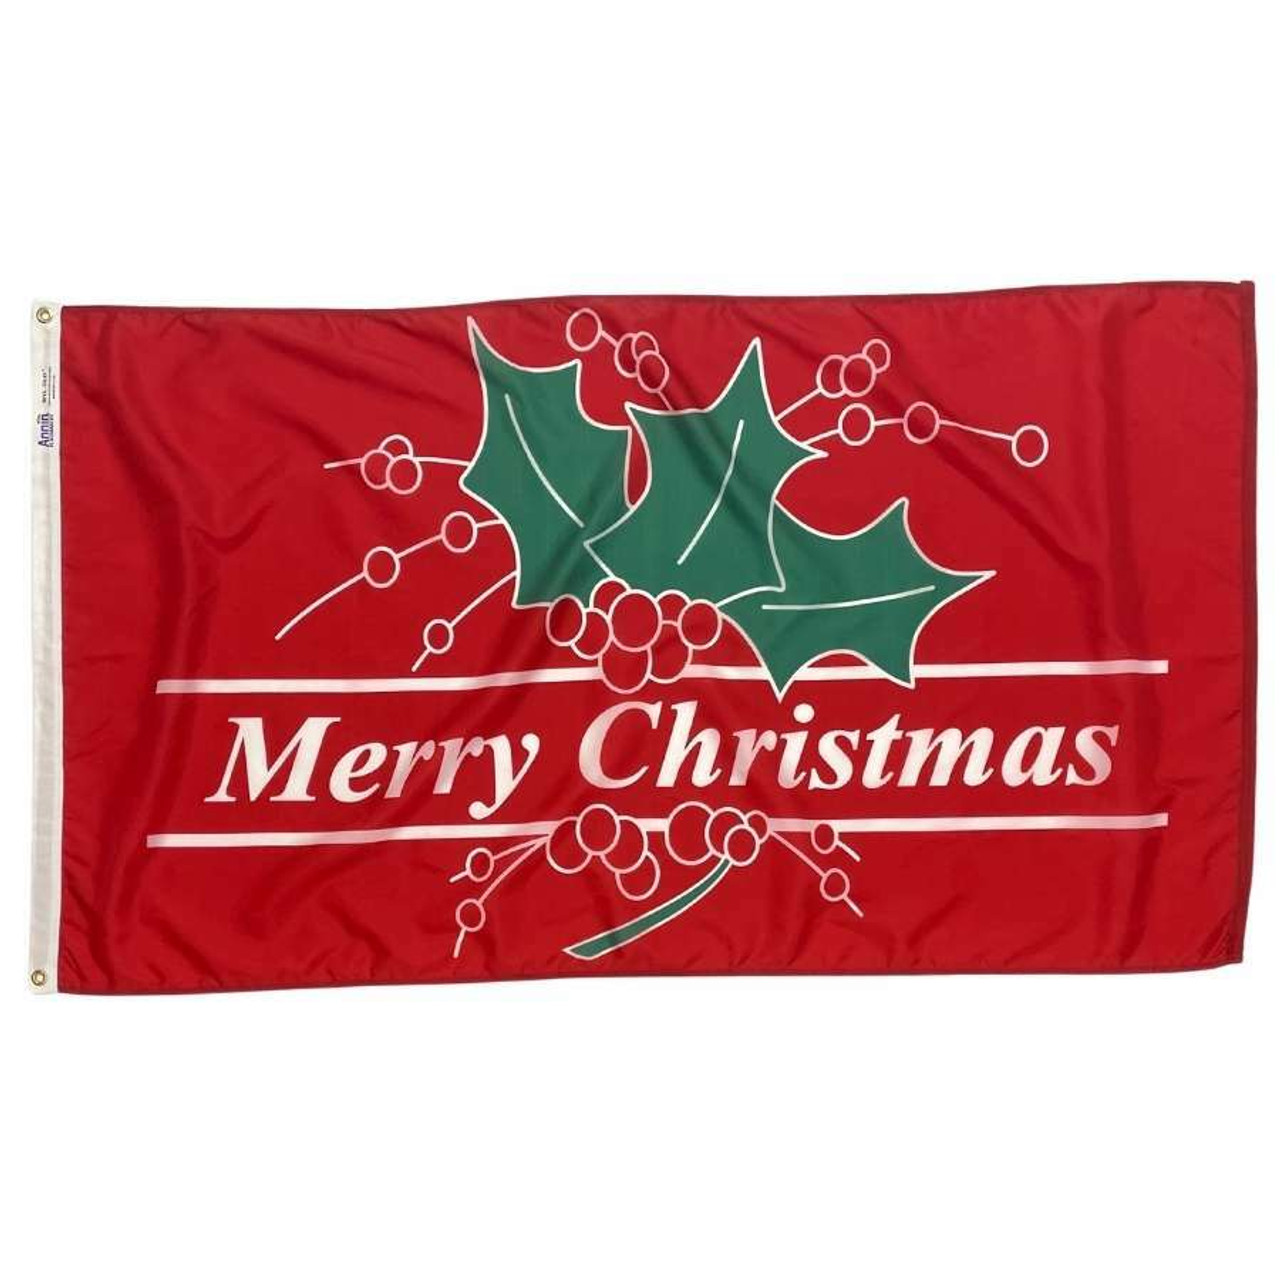 A Christmas flag with a red field. The flag's center has a green holly with “Merry Christmas” below it in white. 